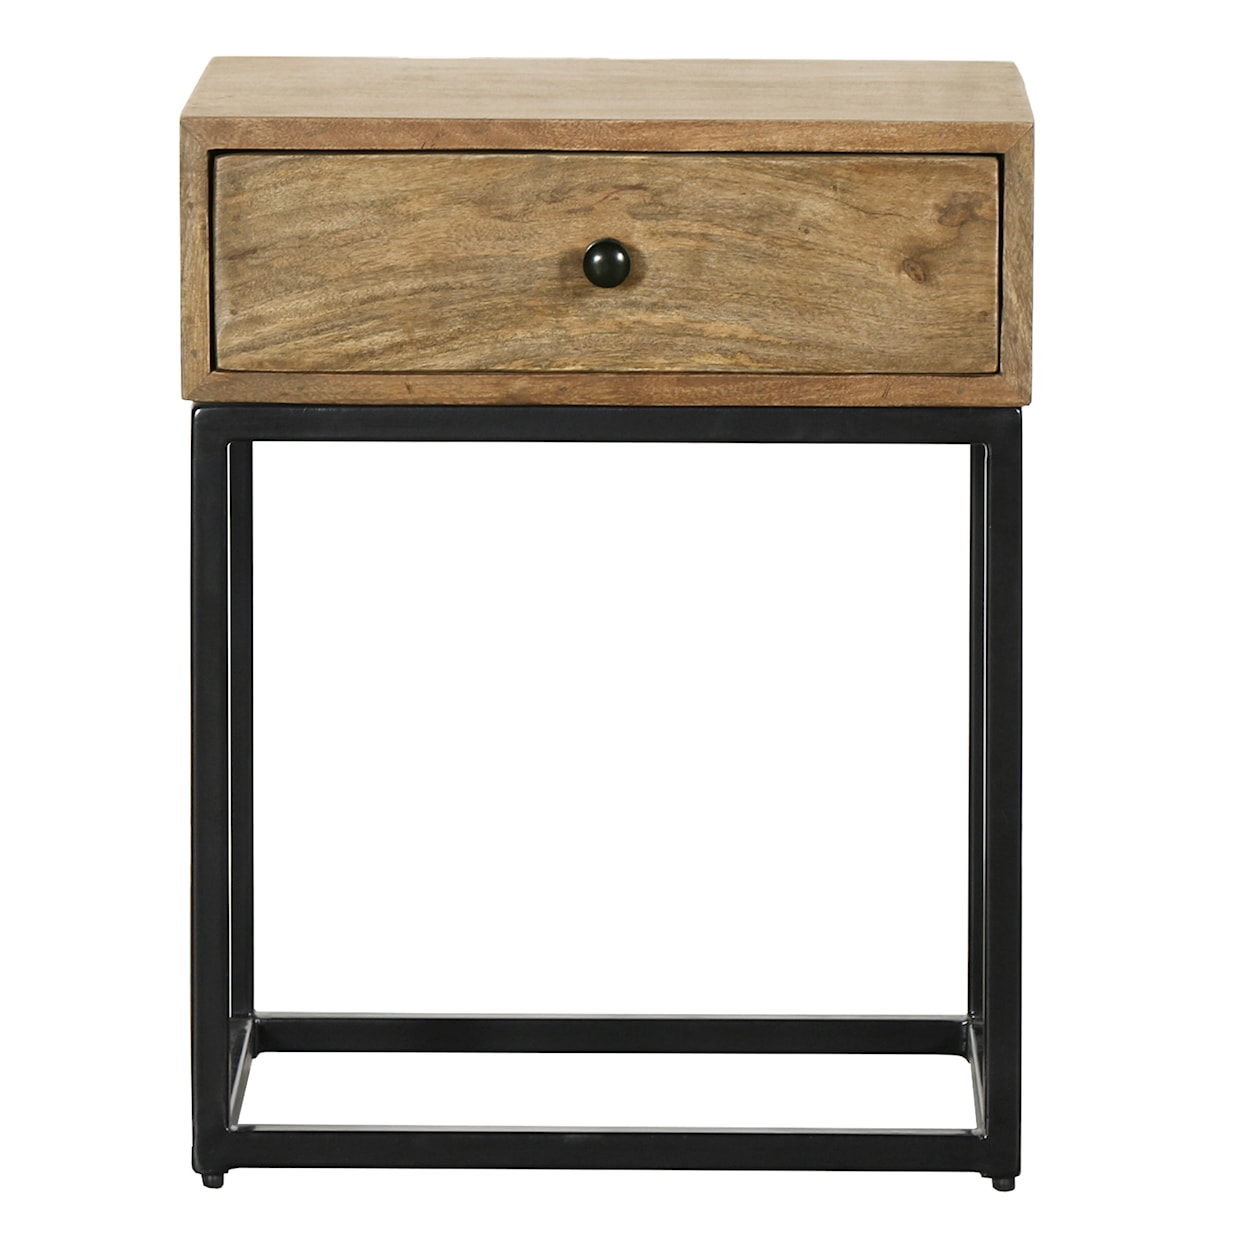 Accentrics Home Accents End Tables